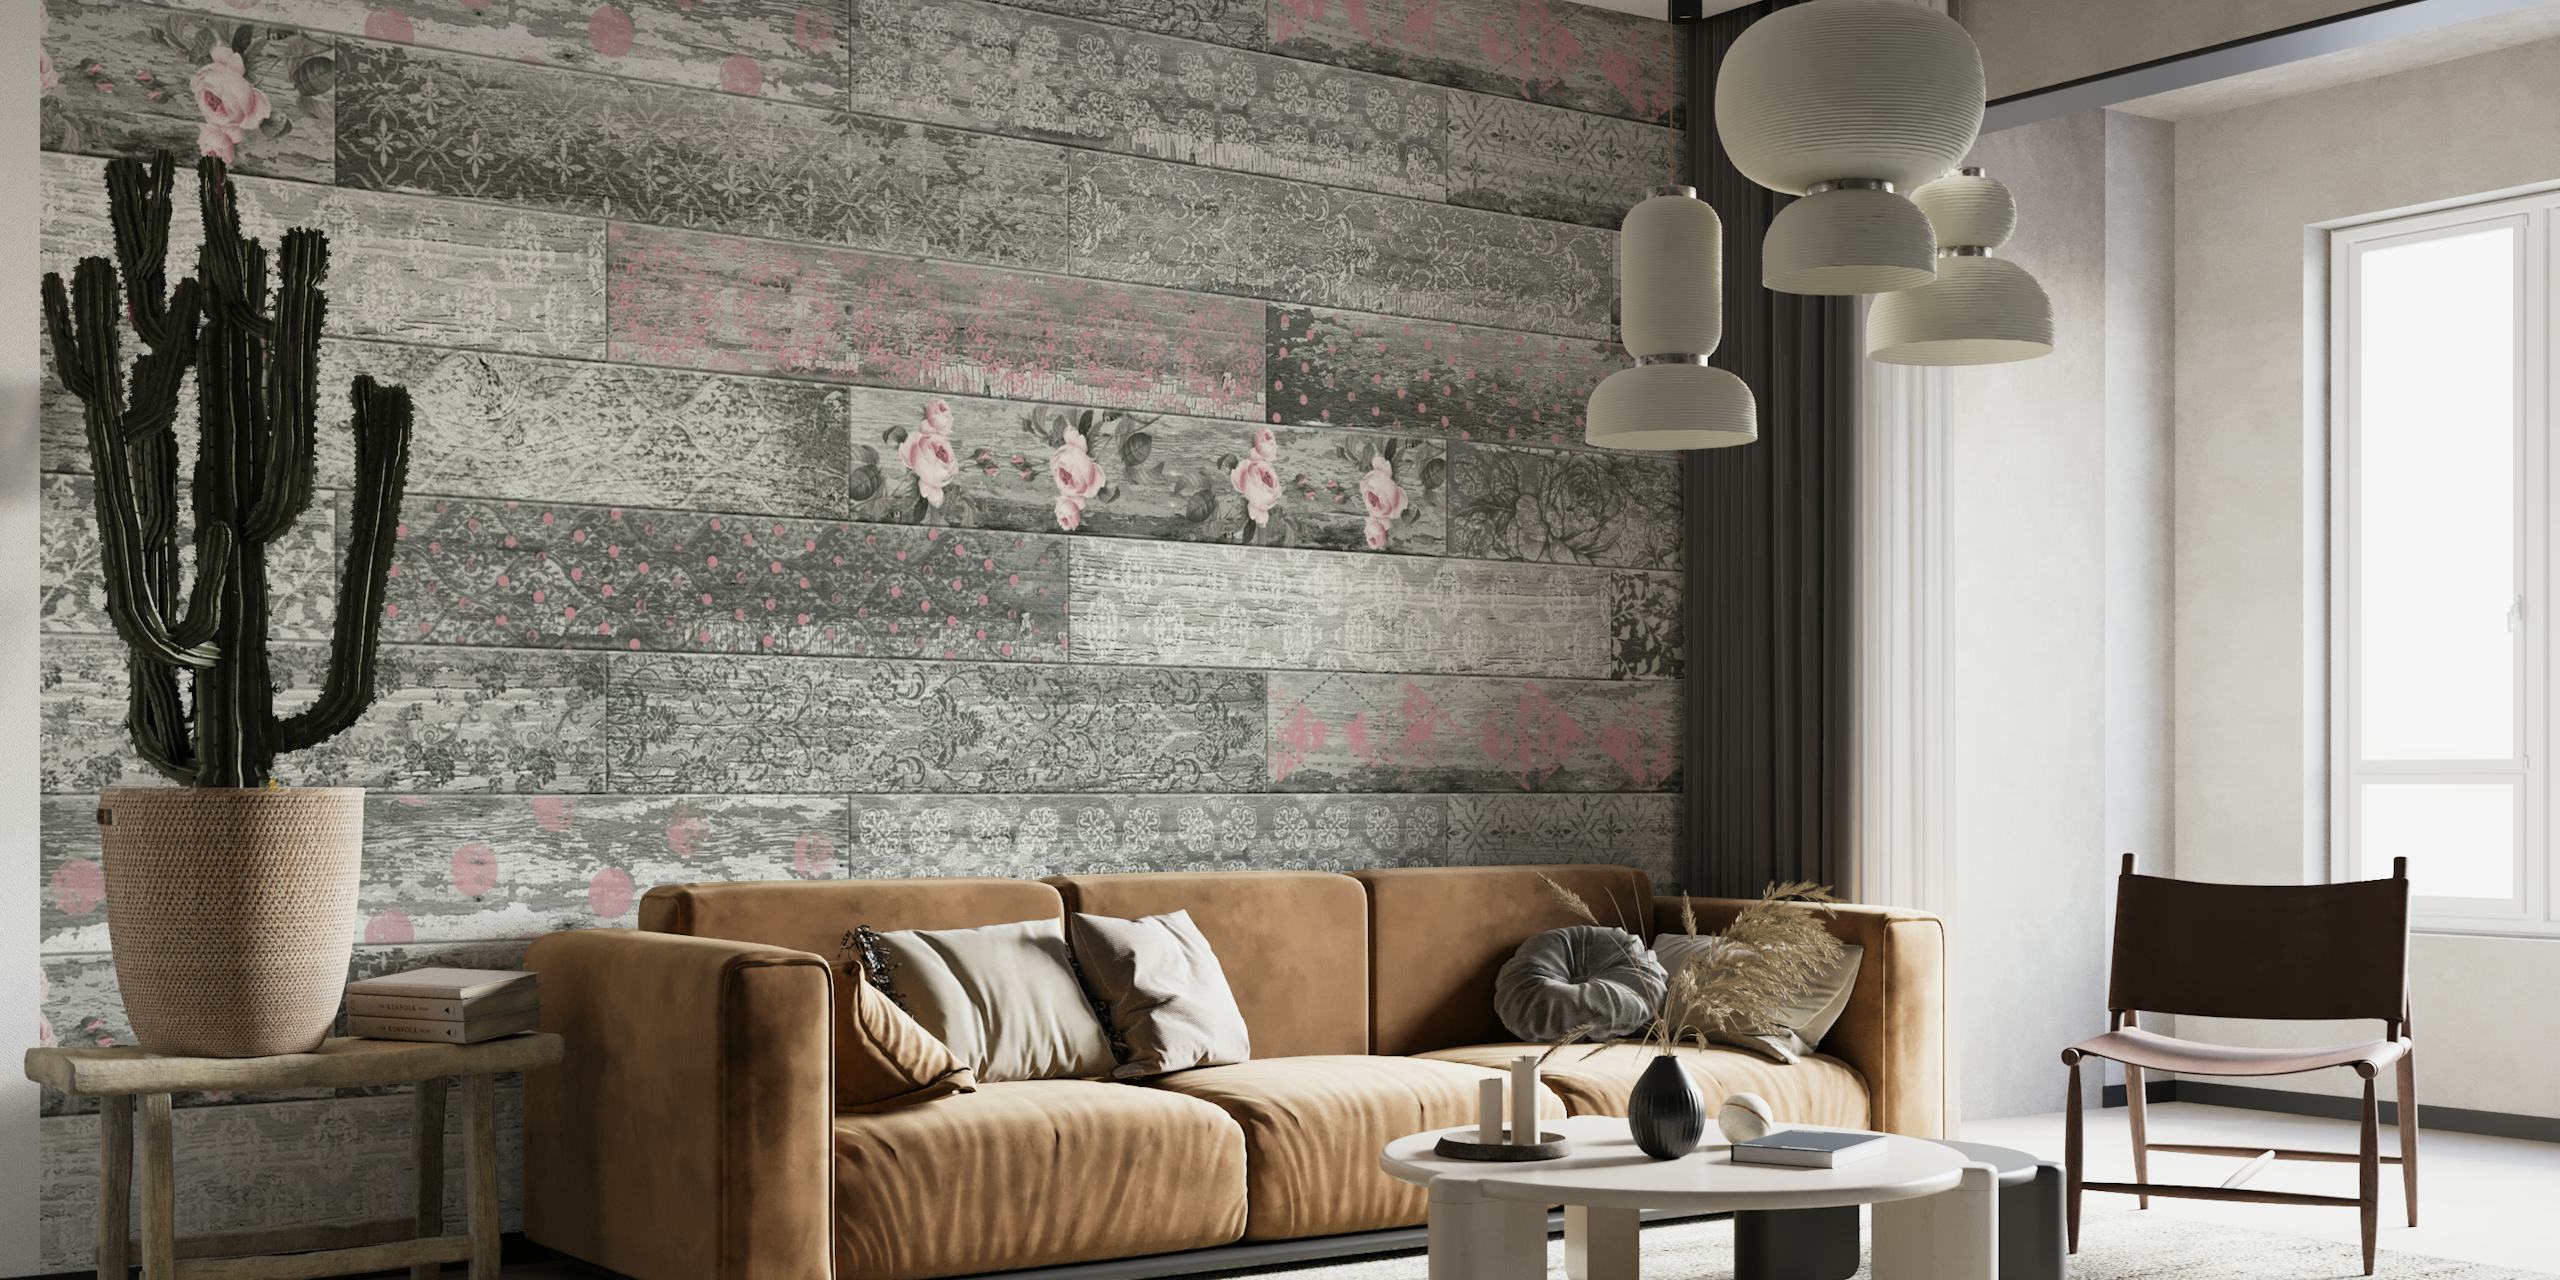 Vintage Wood Tiles Pink Grey wall mural with an illusion of textured wooden panels in shades of pink and grey